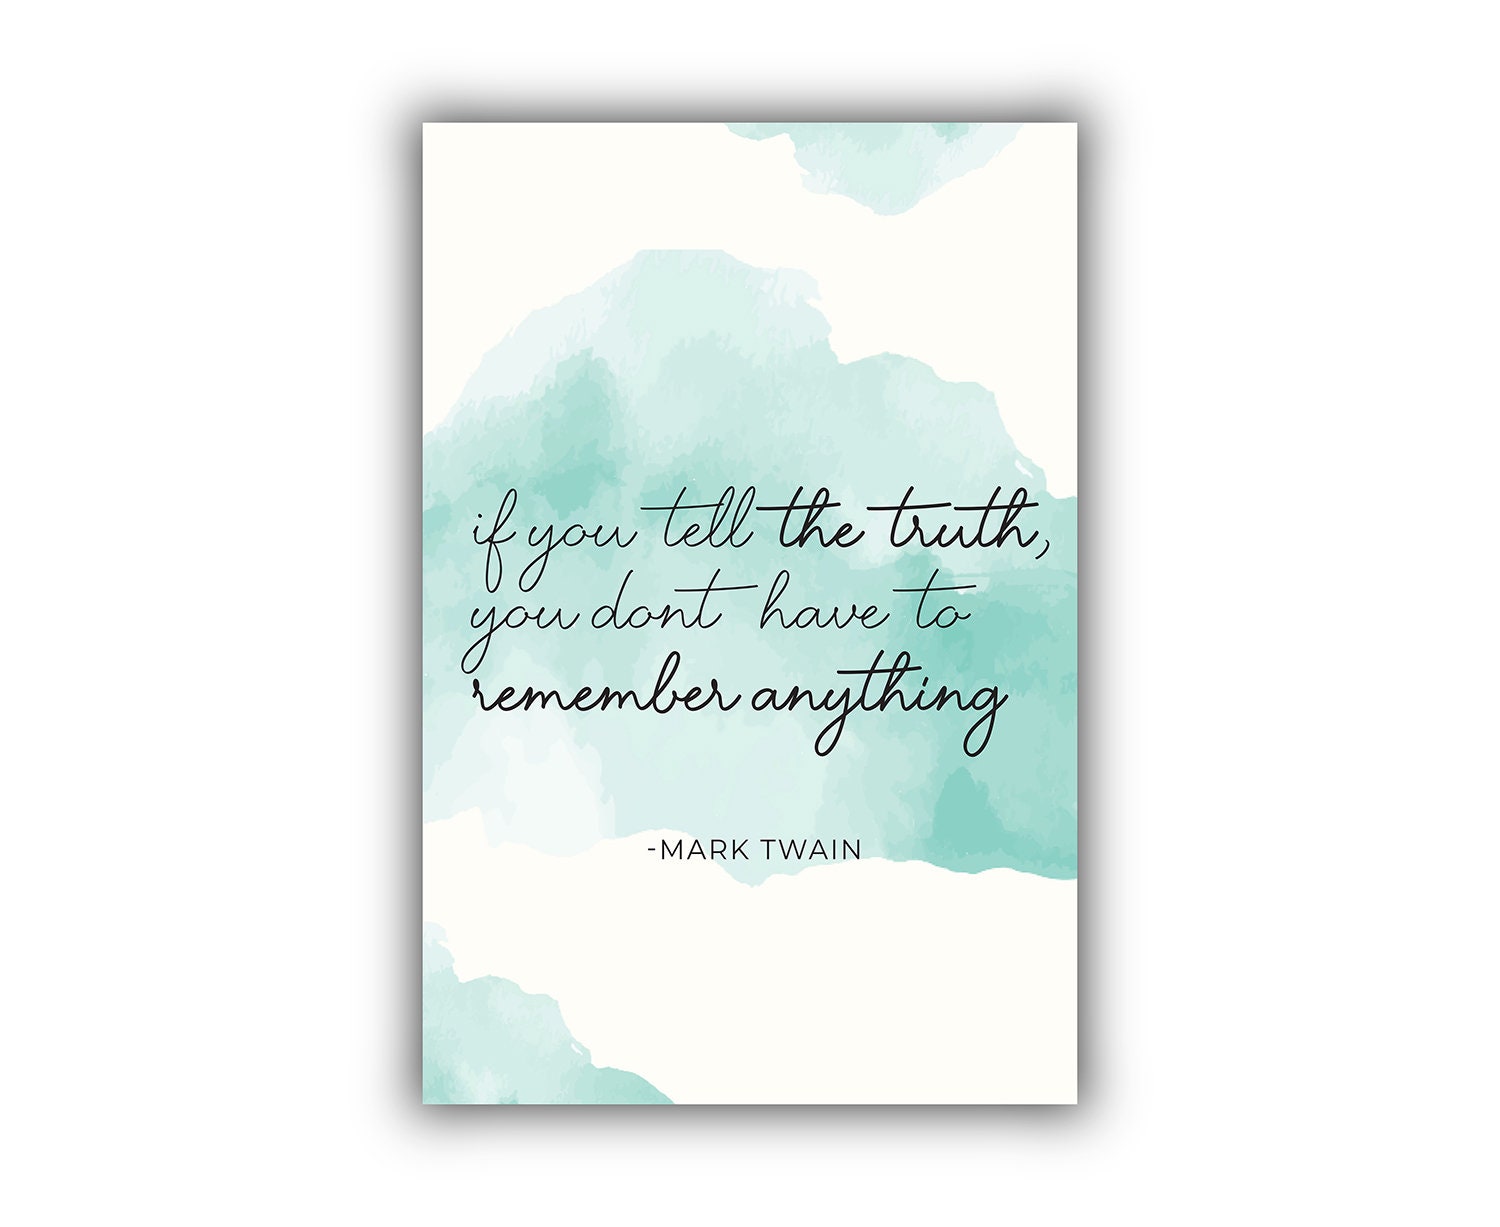 If you tell the truth.., Mark Twain, Poster Prints, Home wall Arts, Dorm Rooms wall art, Office wall decor, Motivational quotes, Home gifts